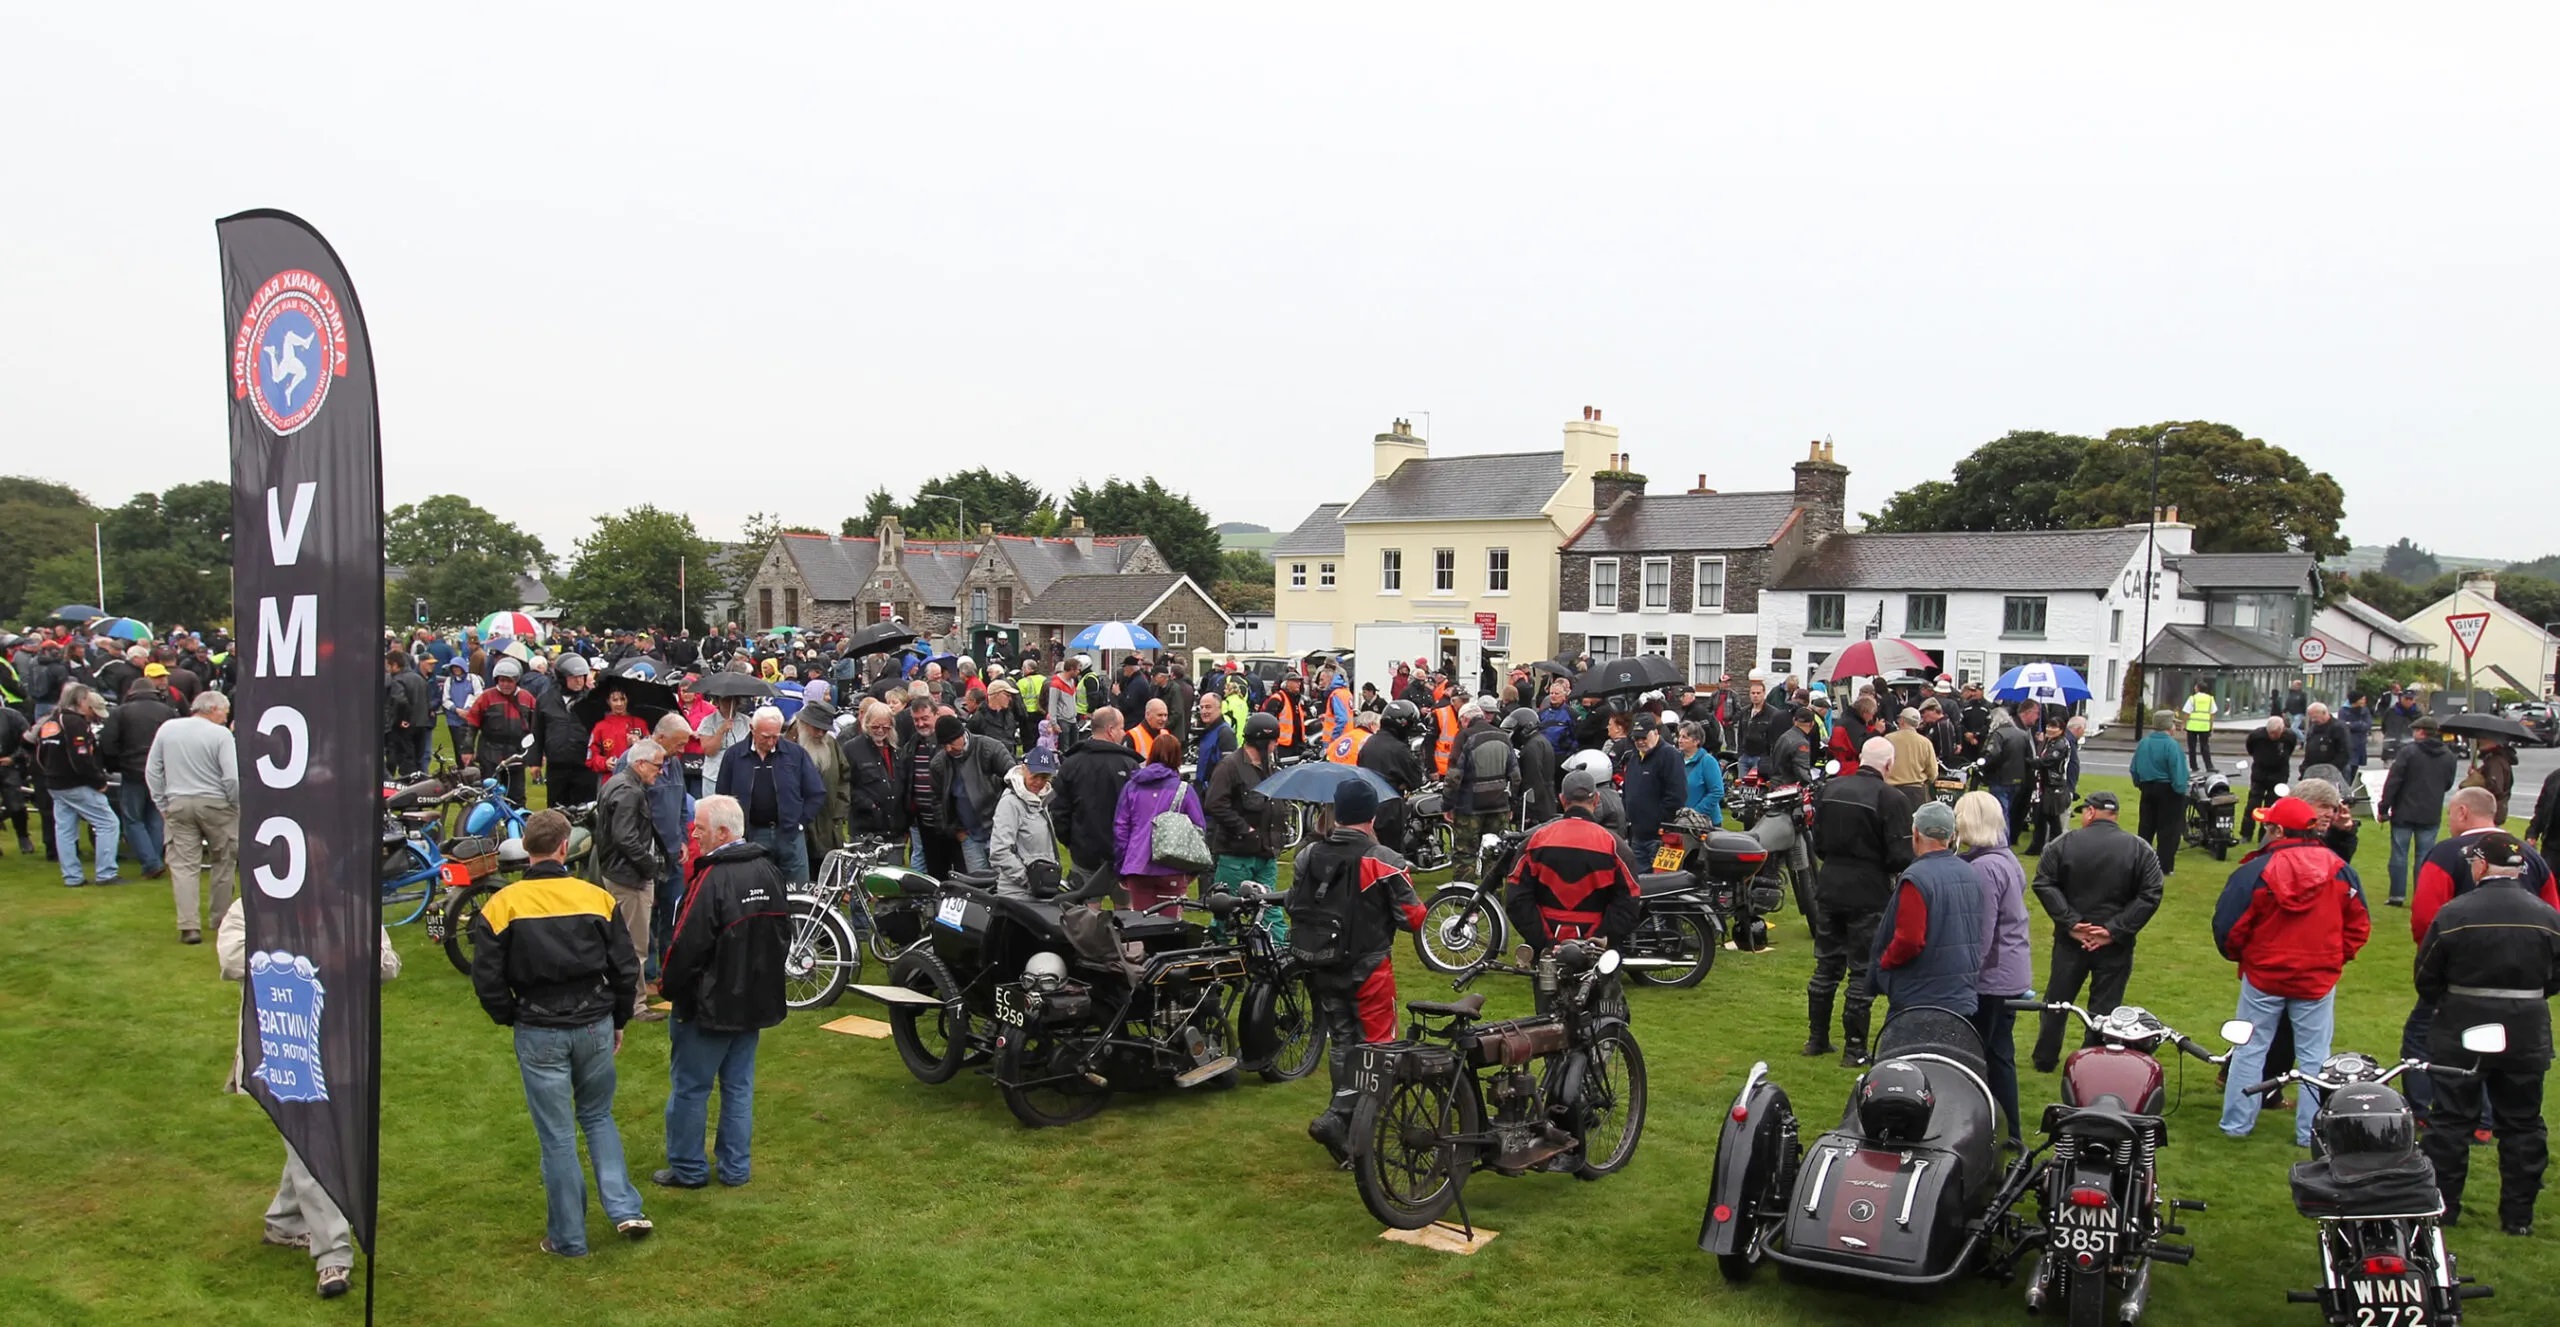 Vintage Motorcycle Club of the Isle of Man concours show in 2021